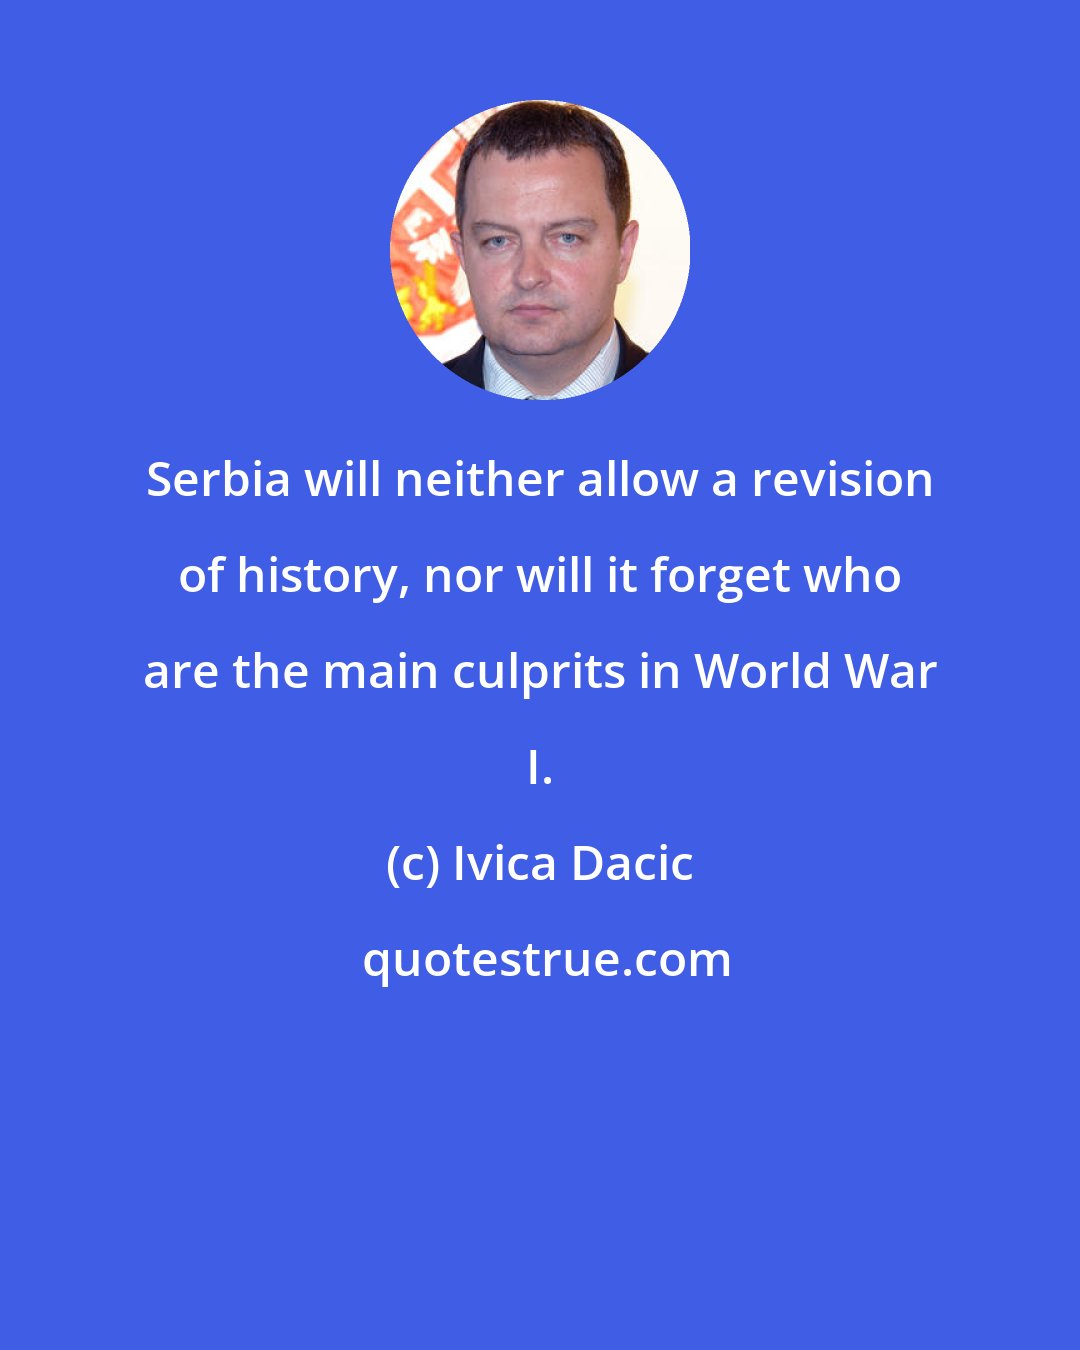 Ivica Dacic: Serbia will neither allow a revision of history, nor will it forget who are the main culprits in World War I.